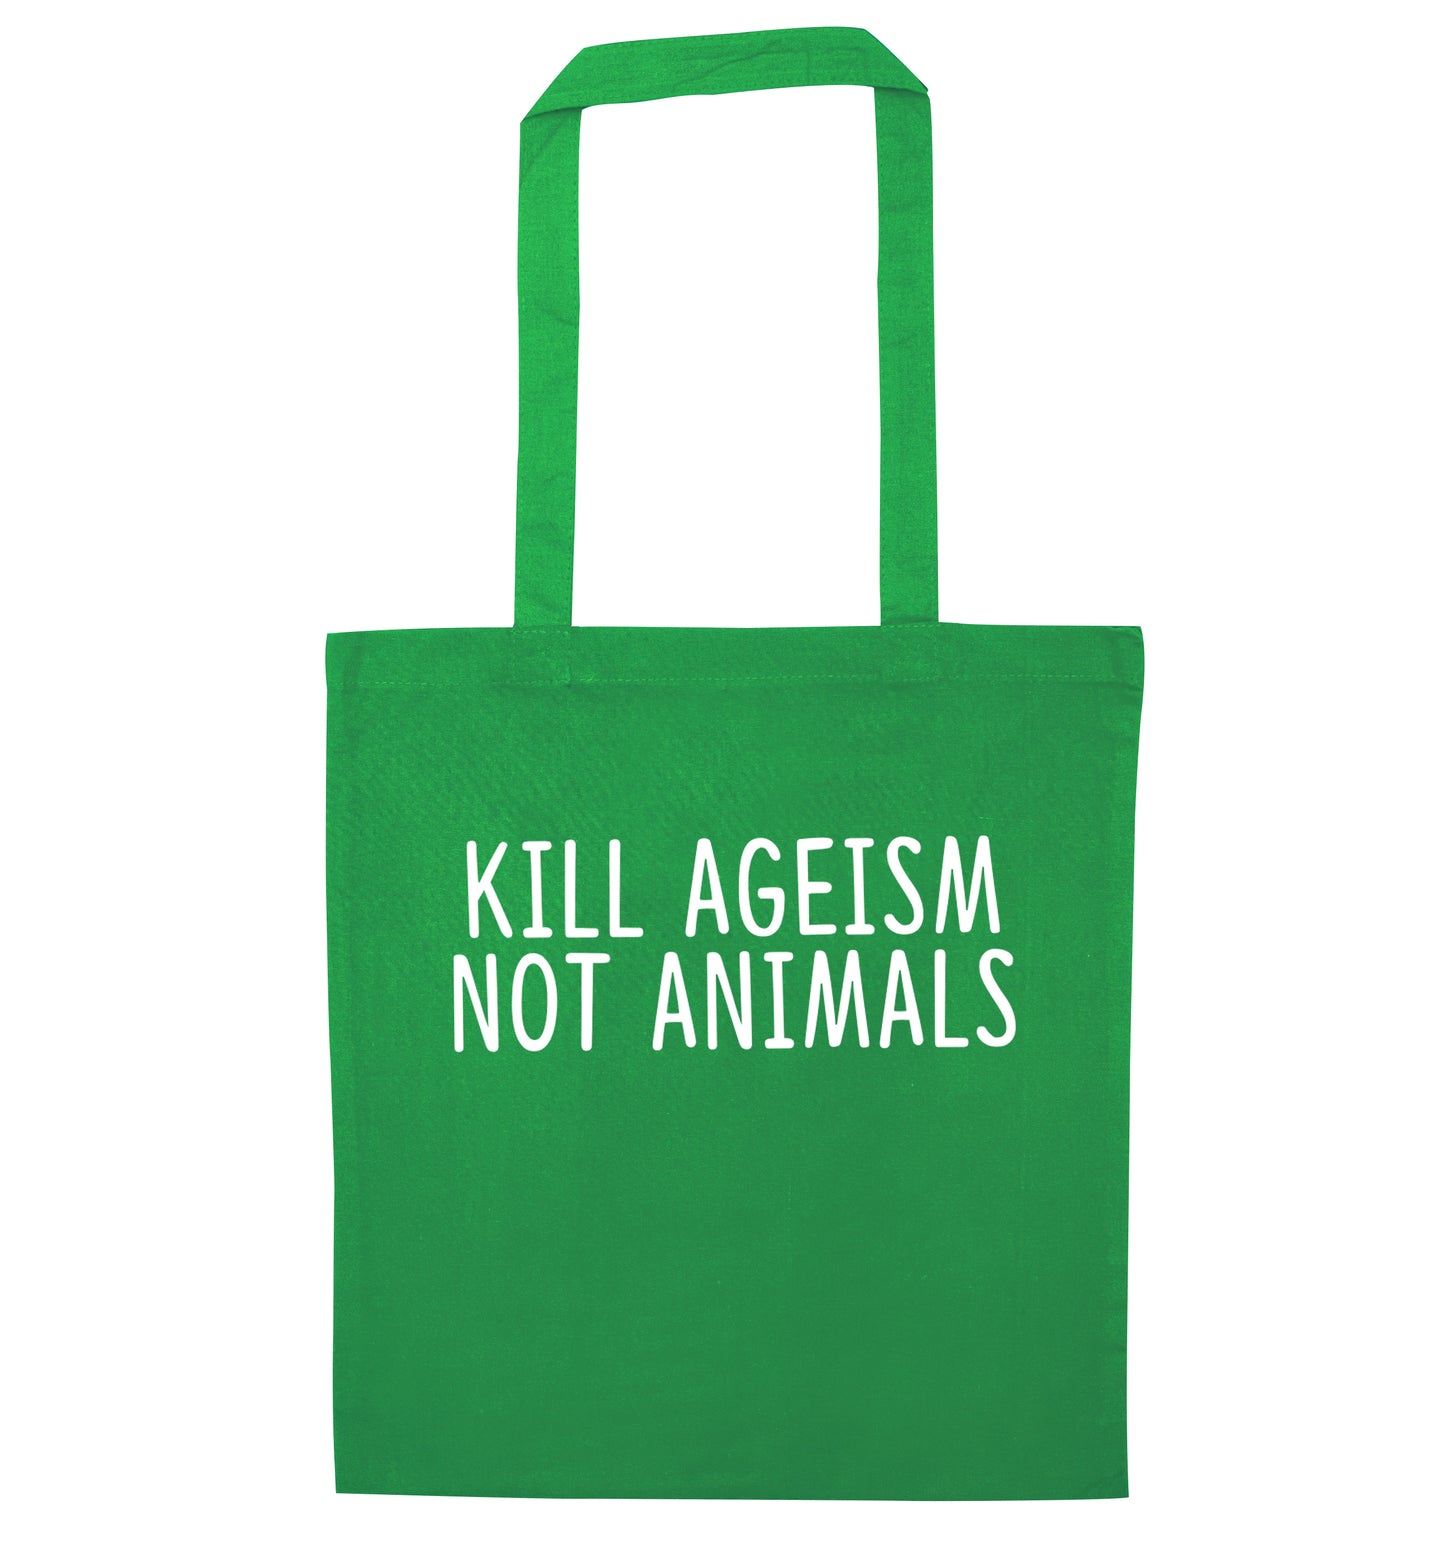 Kill Ageism Not Animals green tote bag